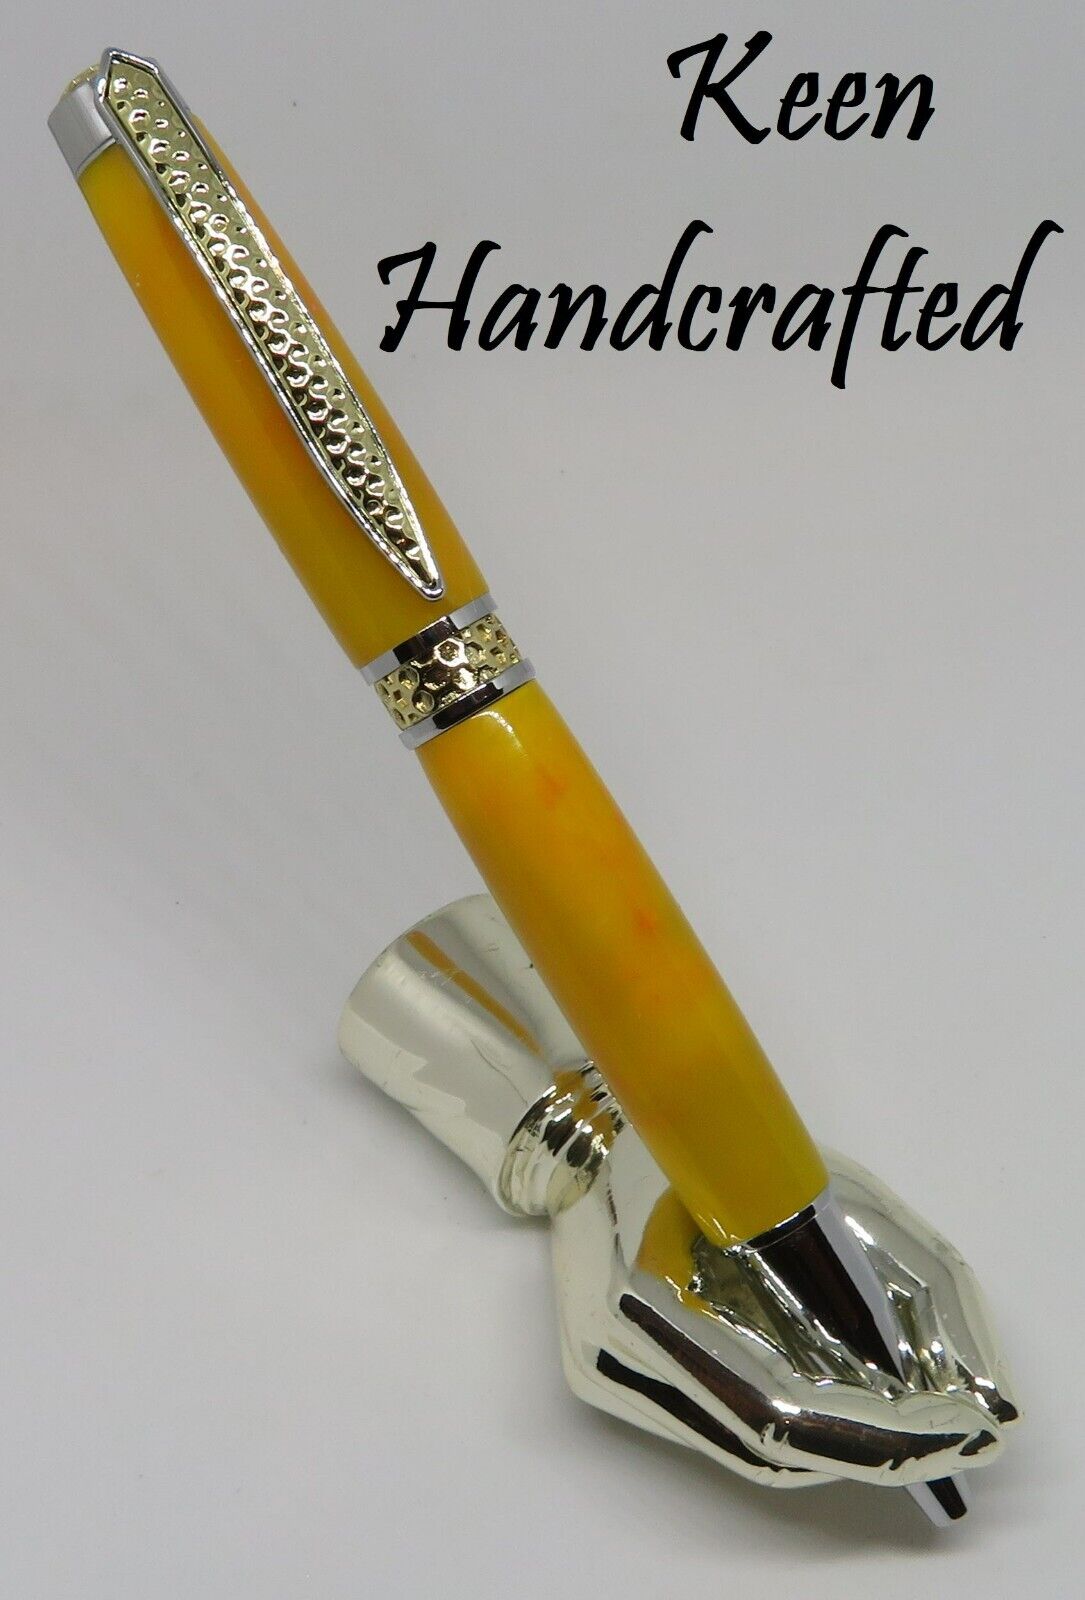 ms - Keen Handcrafted Handmade Yellow Orange Honeycomb Gold and Chrome Twist Pen